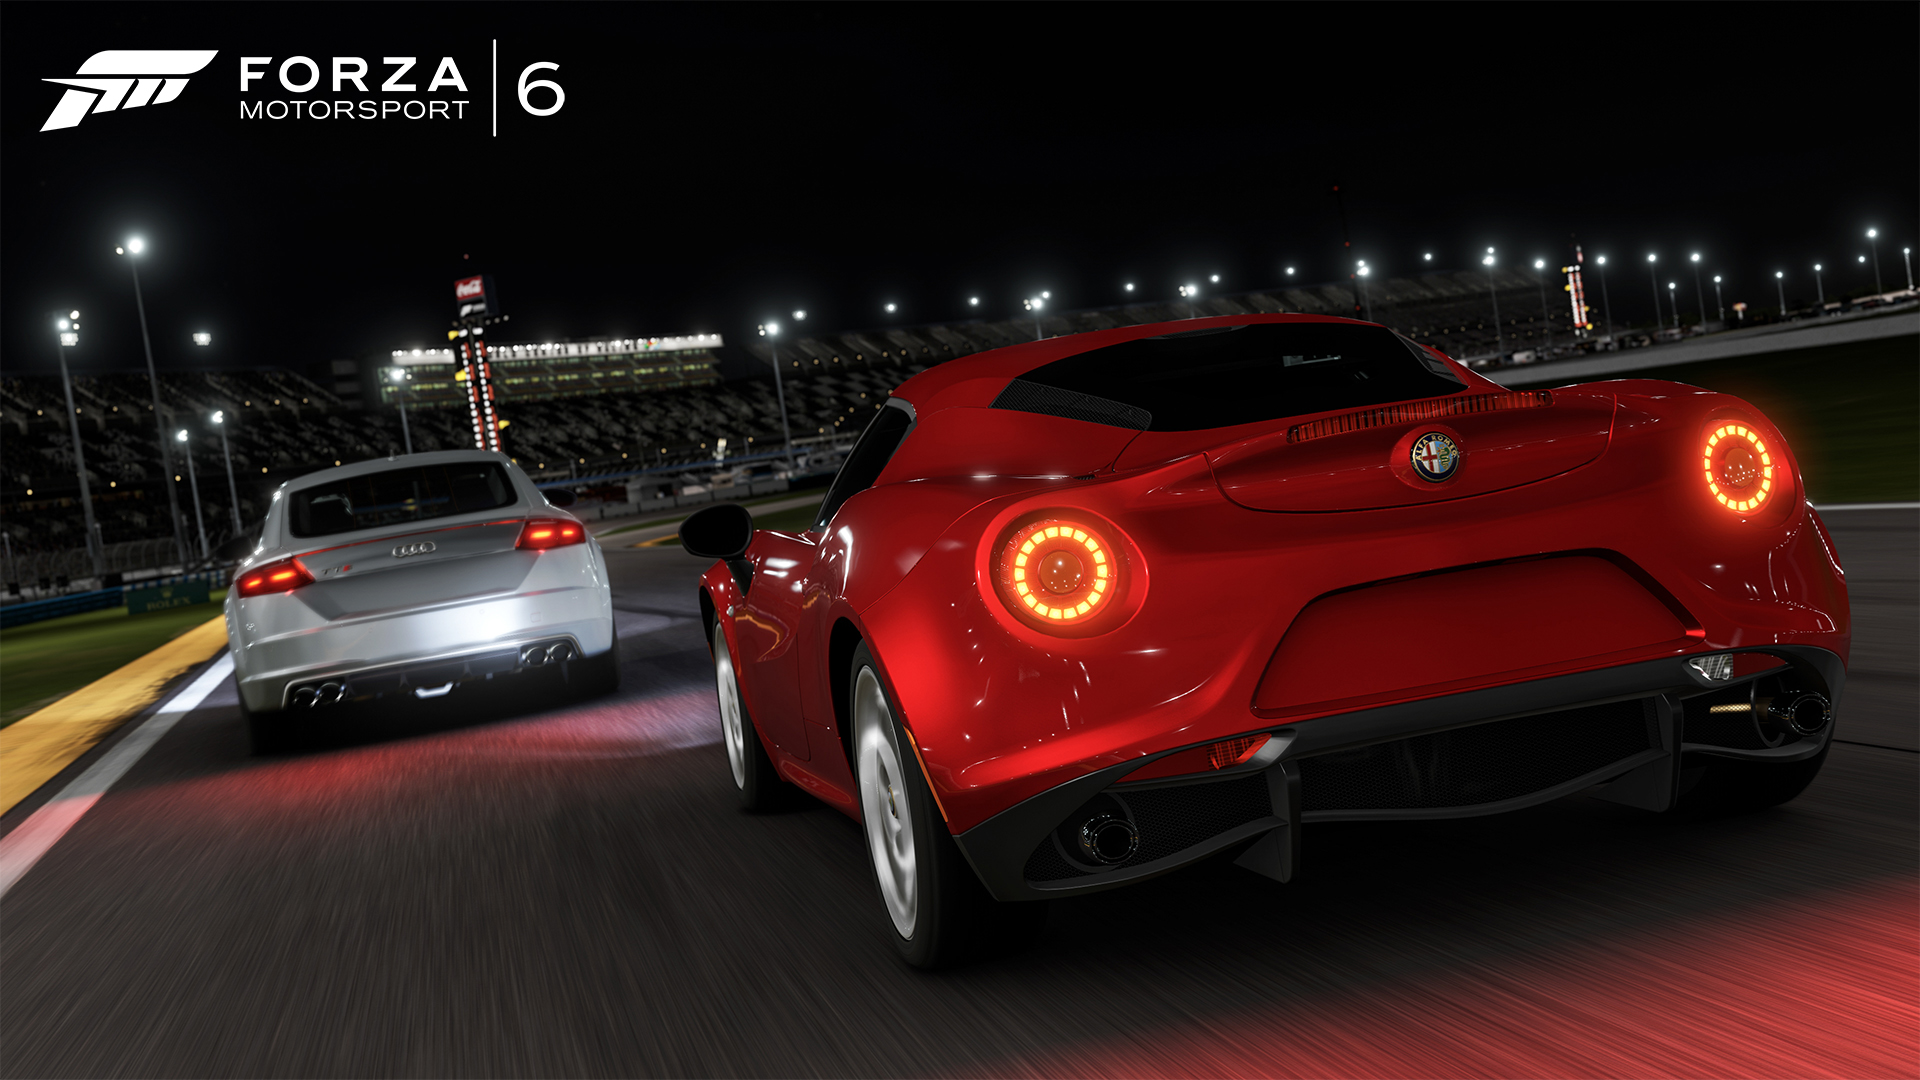 Amazing Forza Motorsport 6 Pictures & Backgrounds